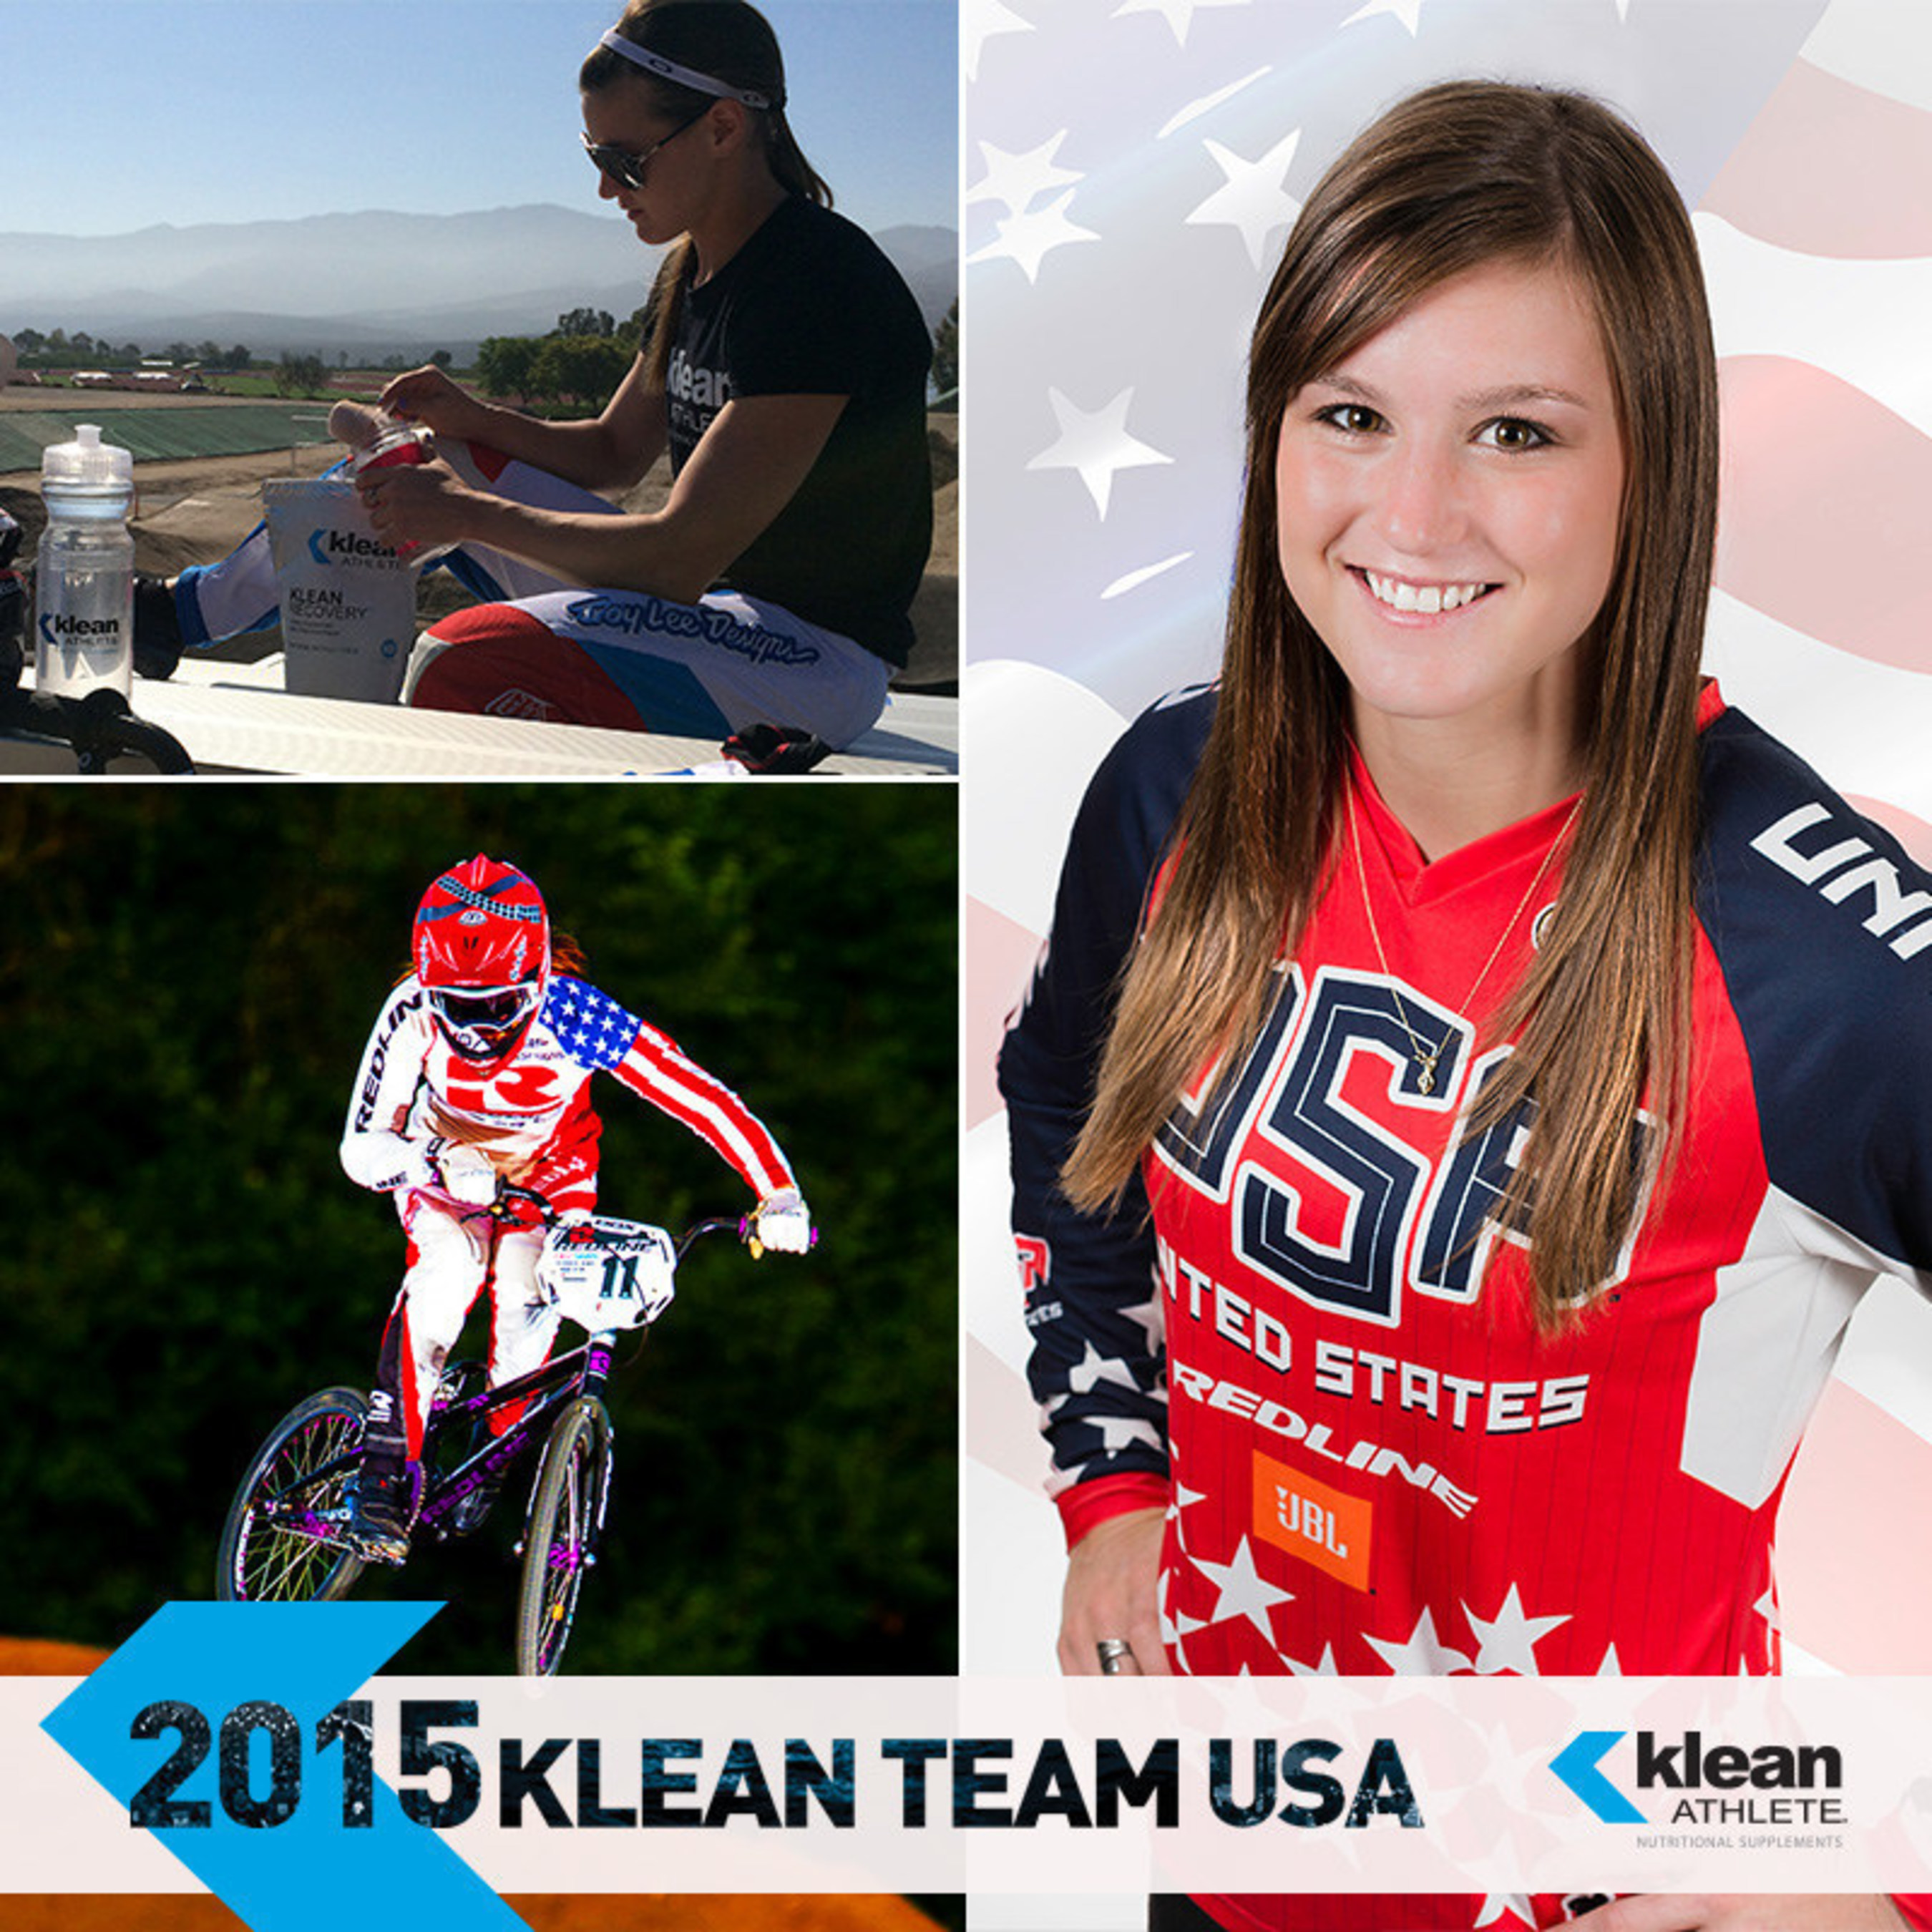 BMX Pro Alise Post Joins the 2015 Klean Team USA, sponsored by Klean Athlete. Learn more at www.kleanathlete.com